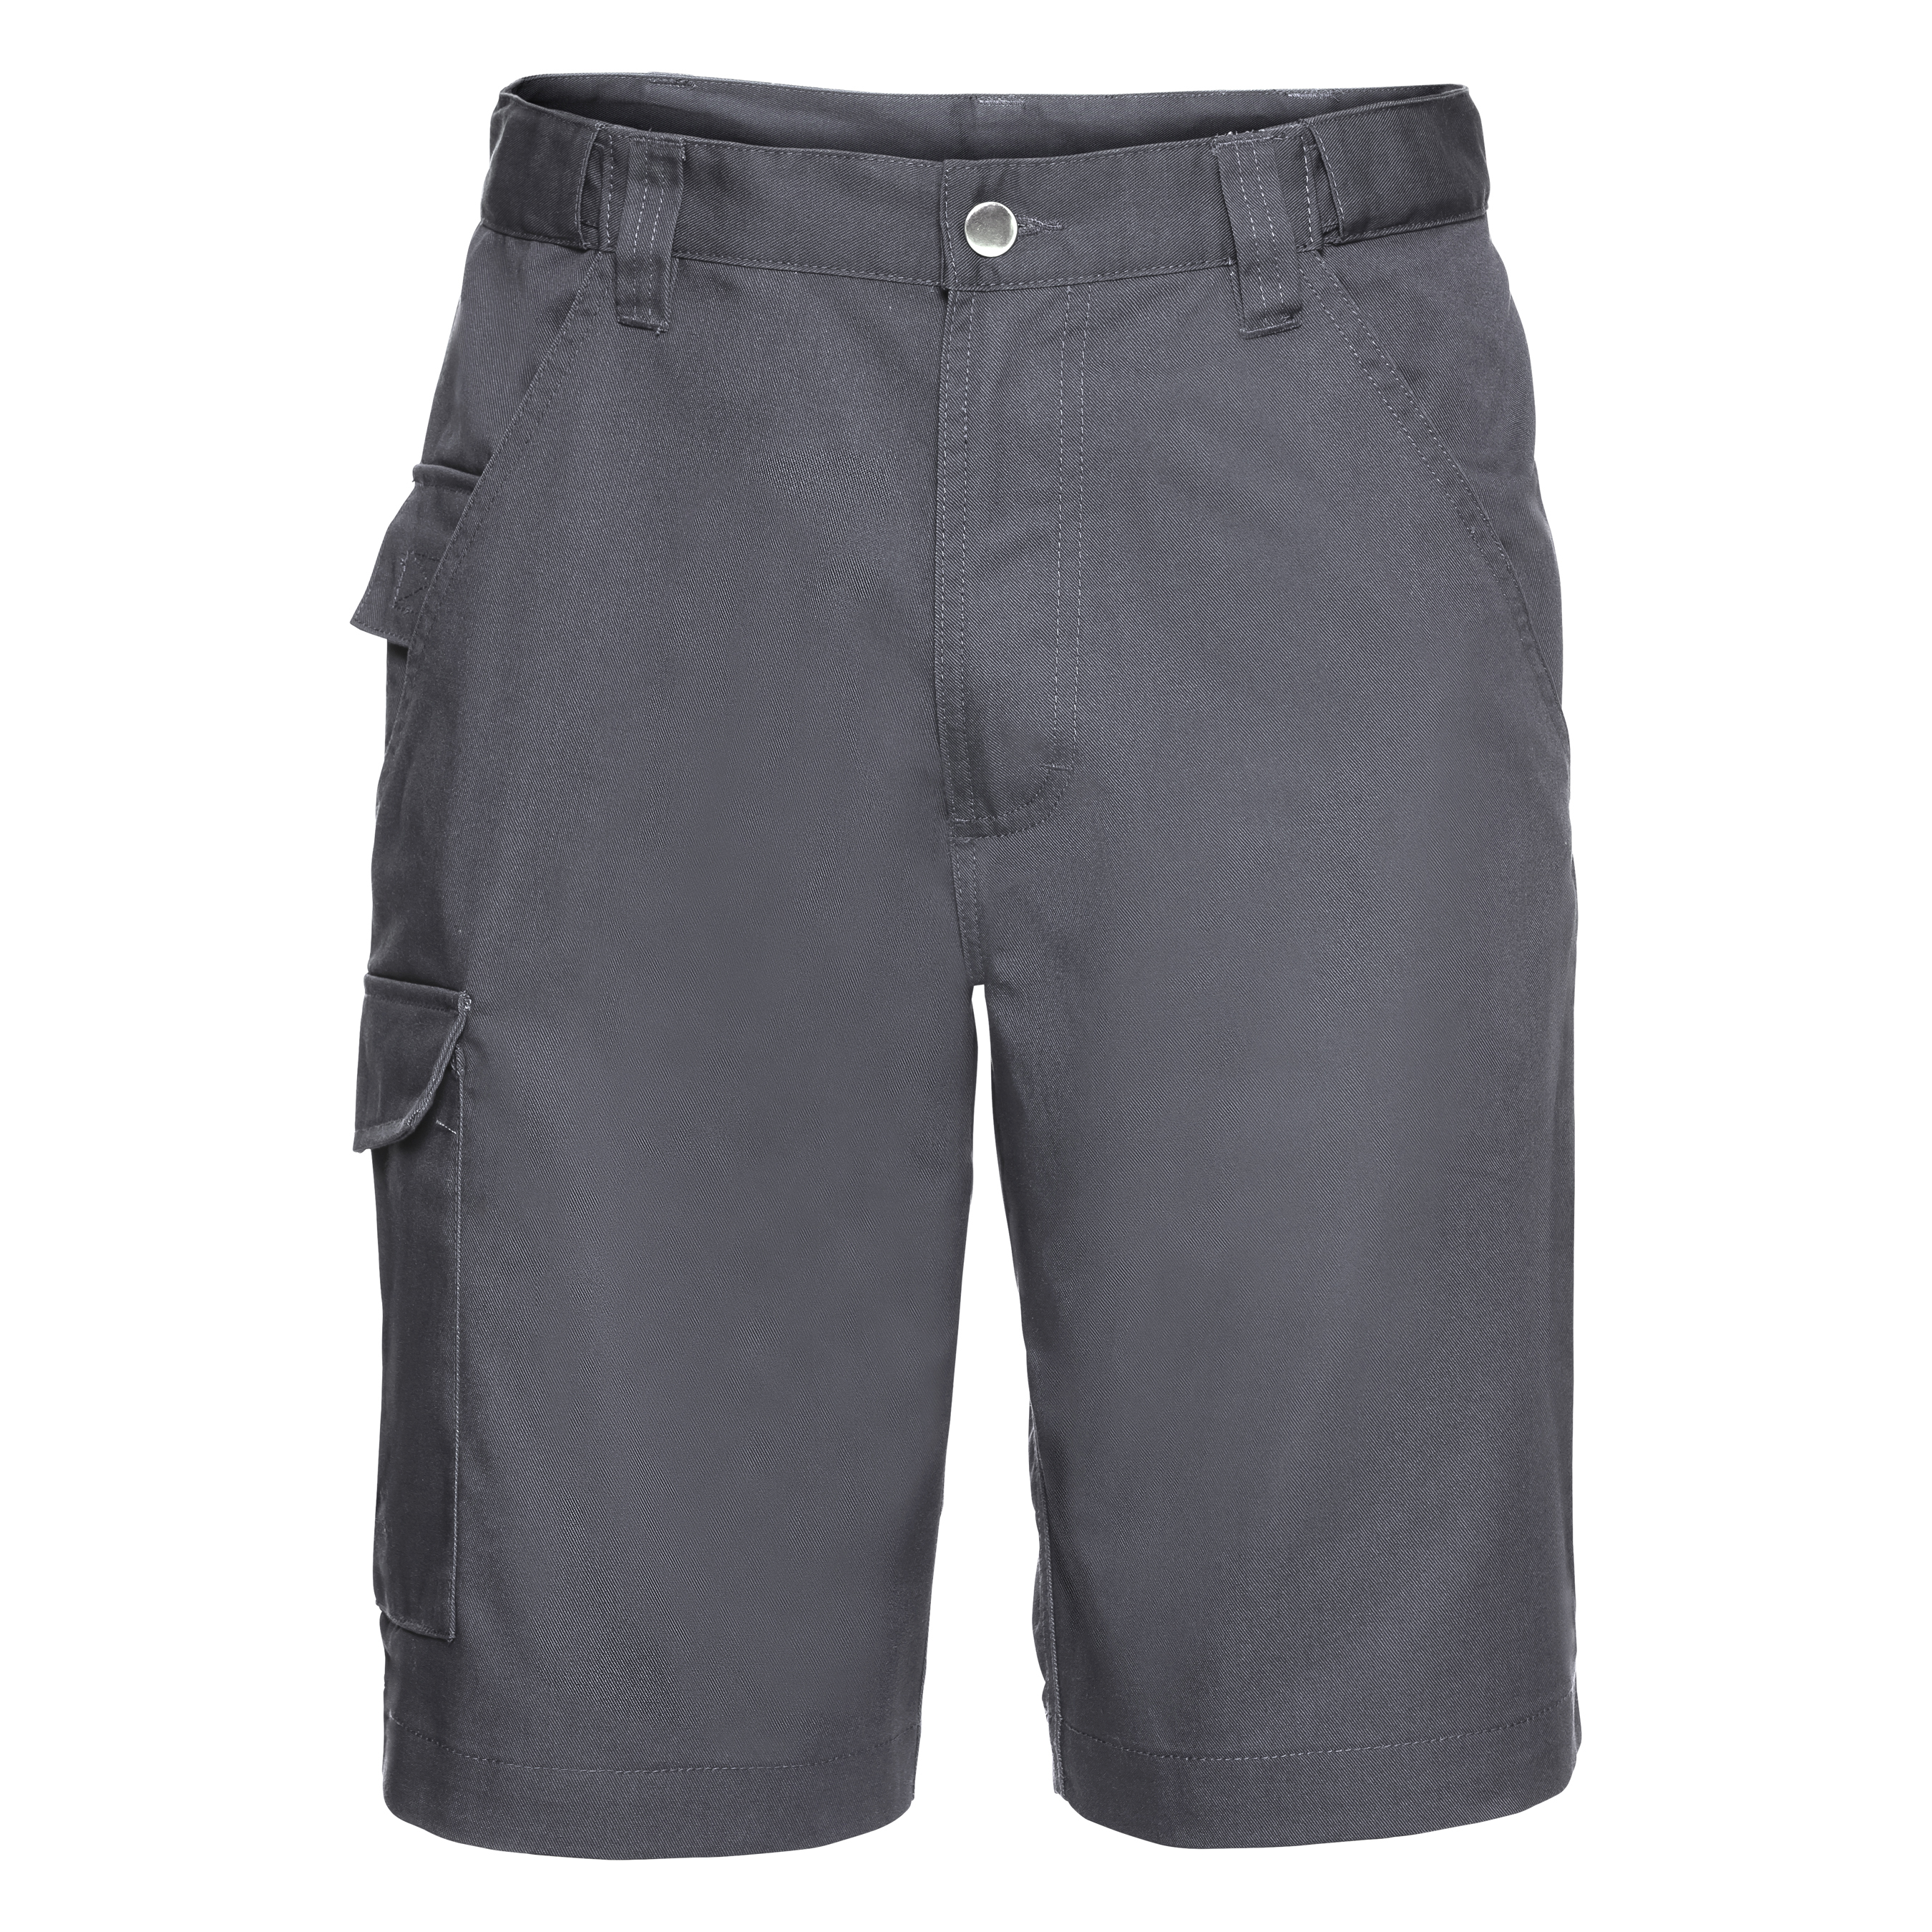 ax-httpswebsystems.s3.amazonaws.comtmp_for_downloadrussell-polycotton-twill-workwear-shorts-convoy-grey.jpeg.jpg